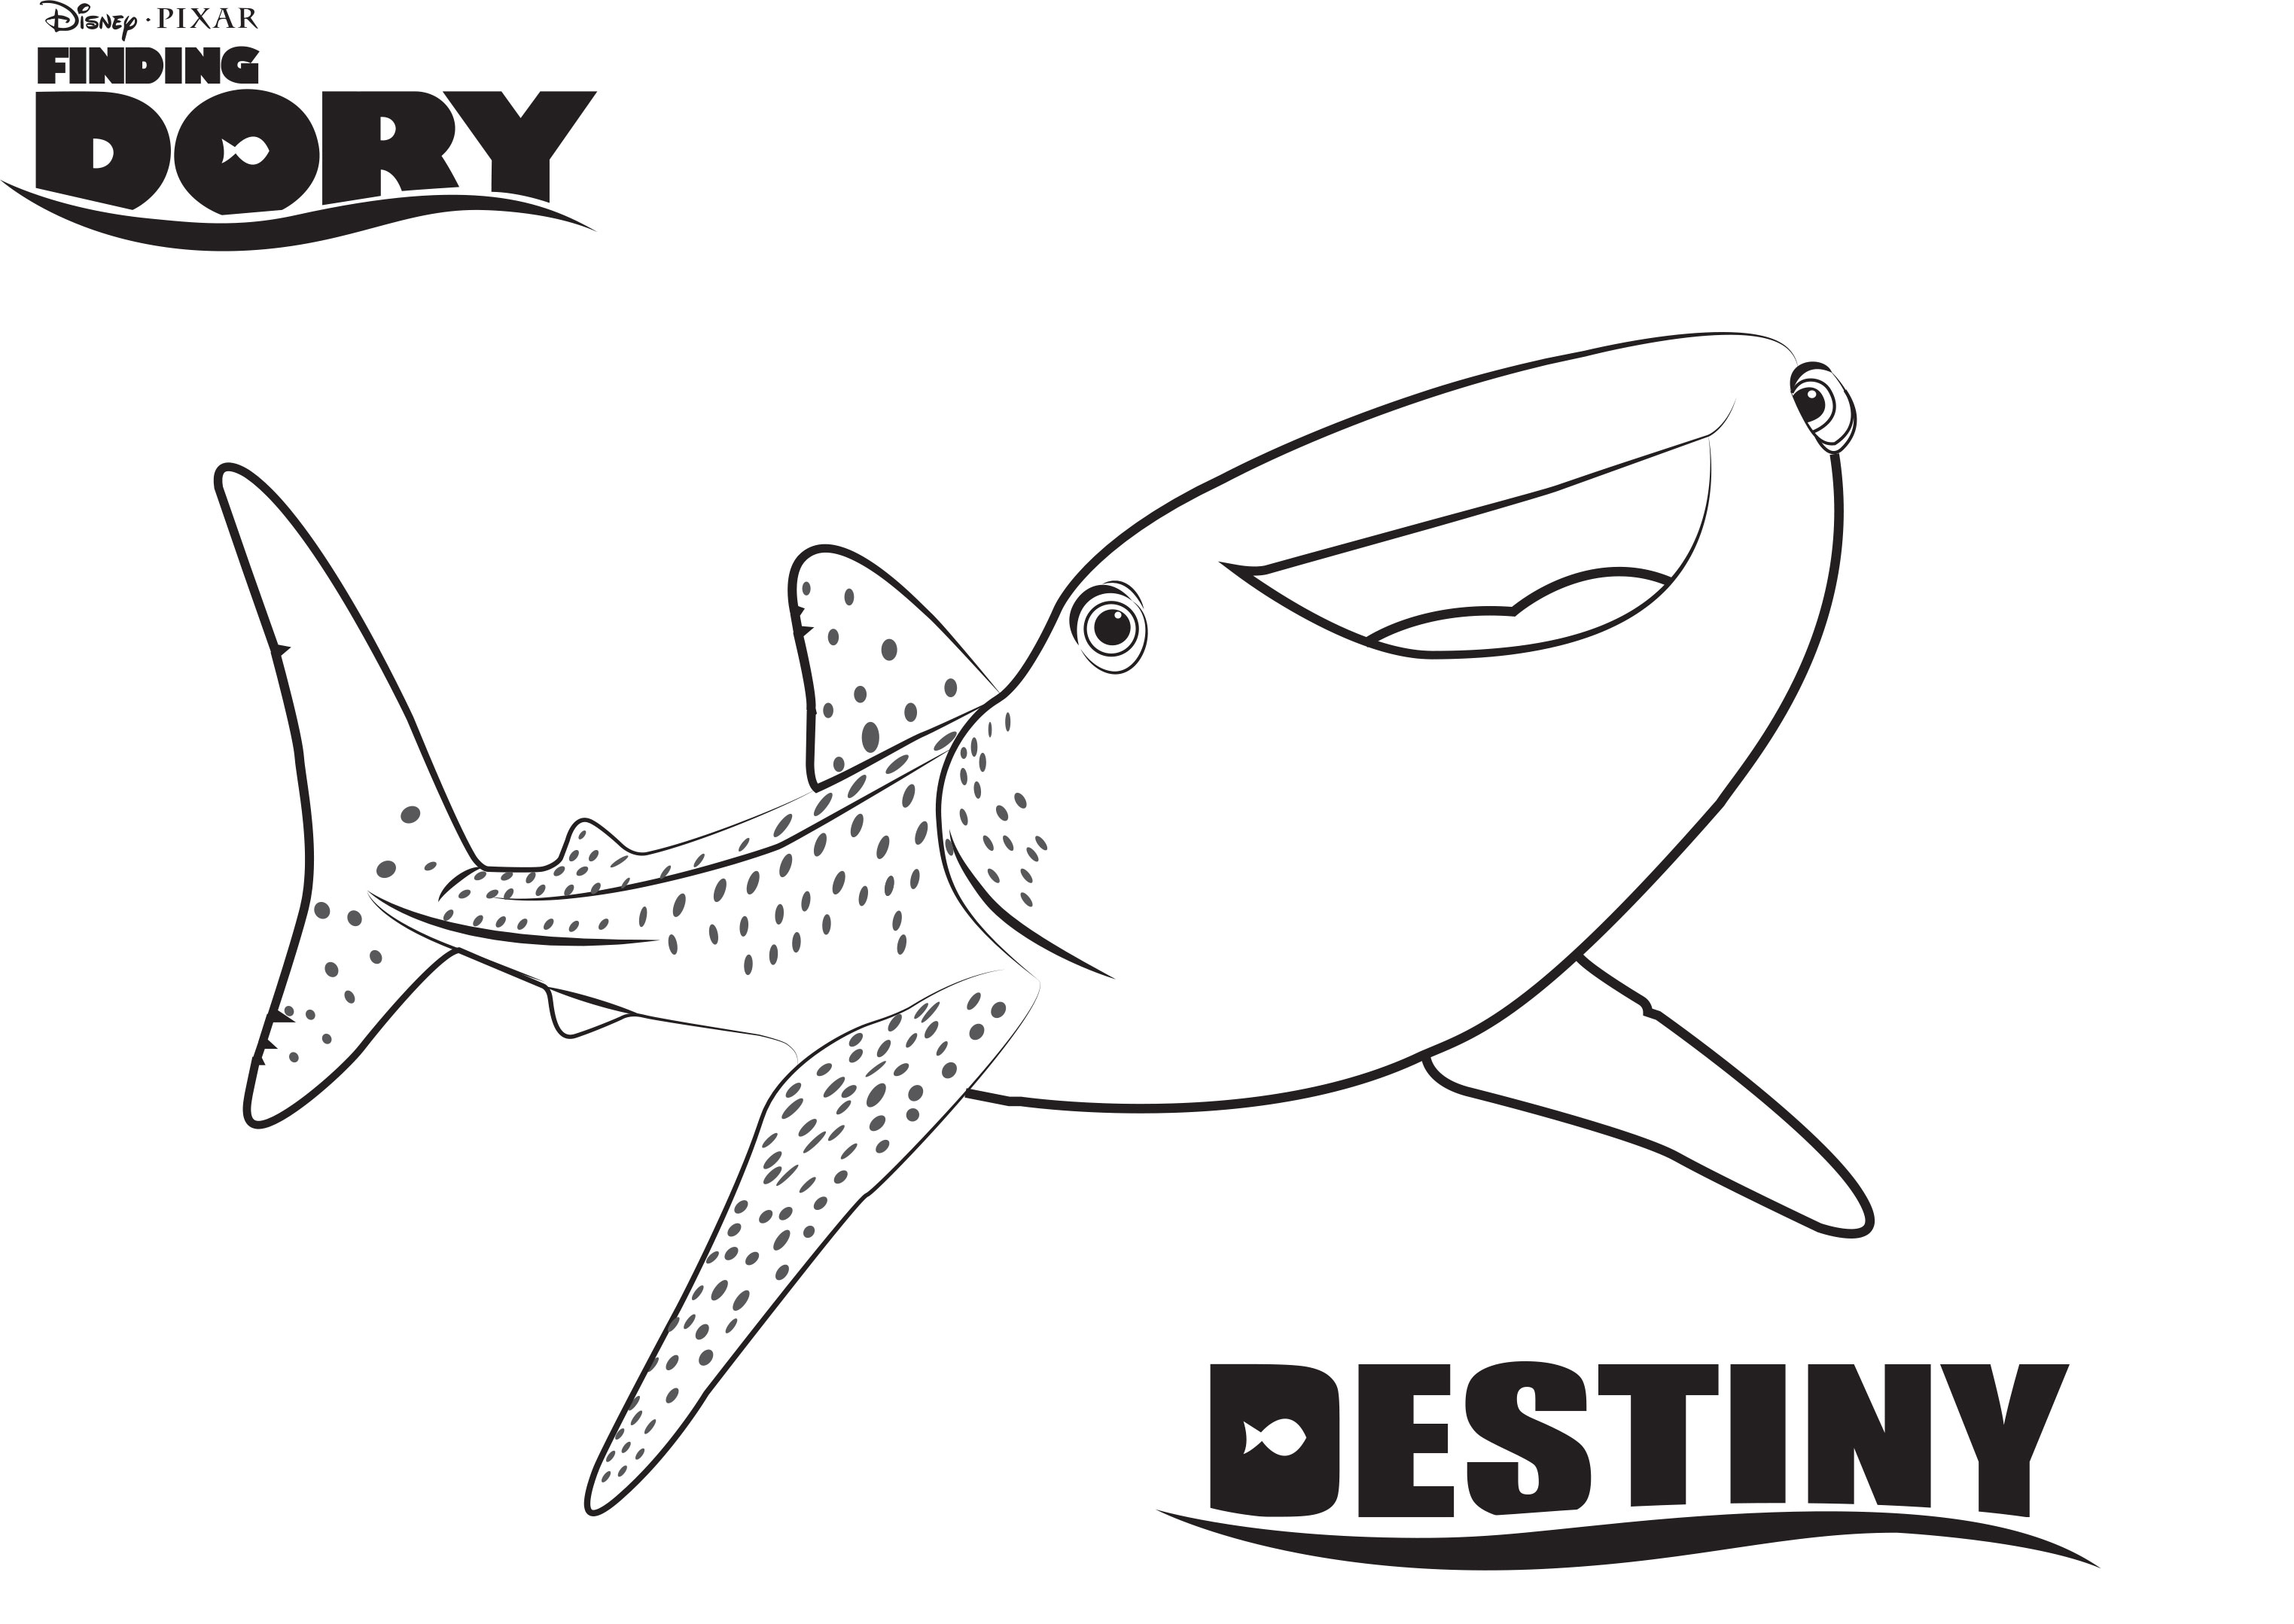 Destiny - Finding Dory Coloring Page